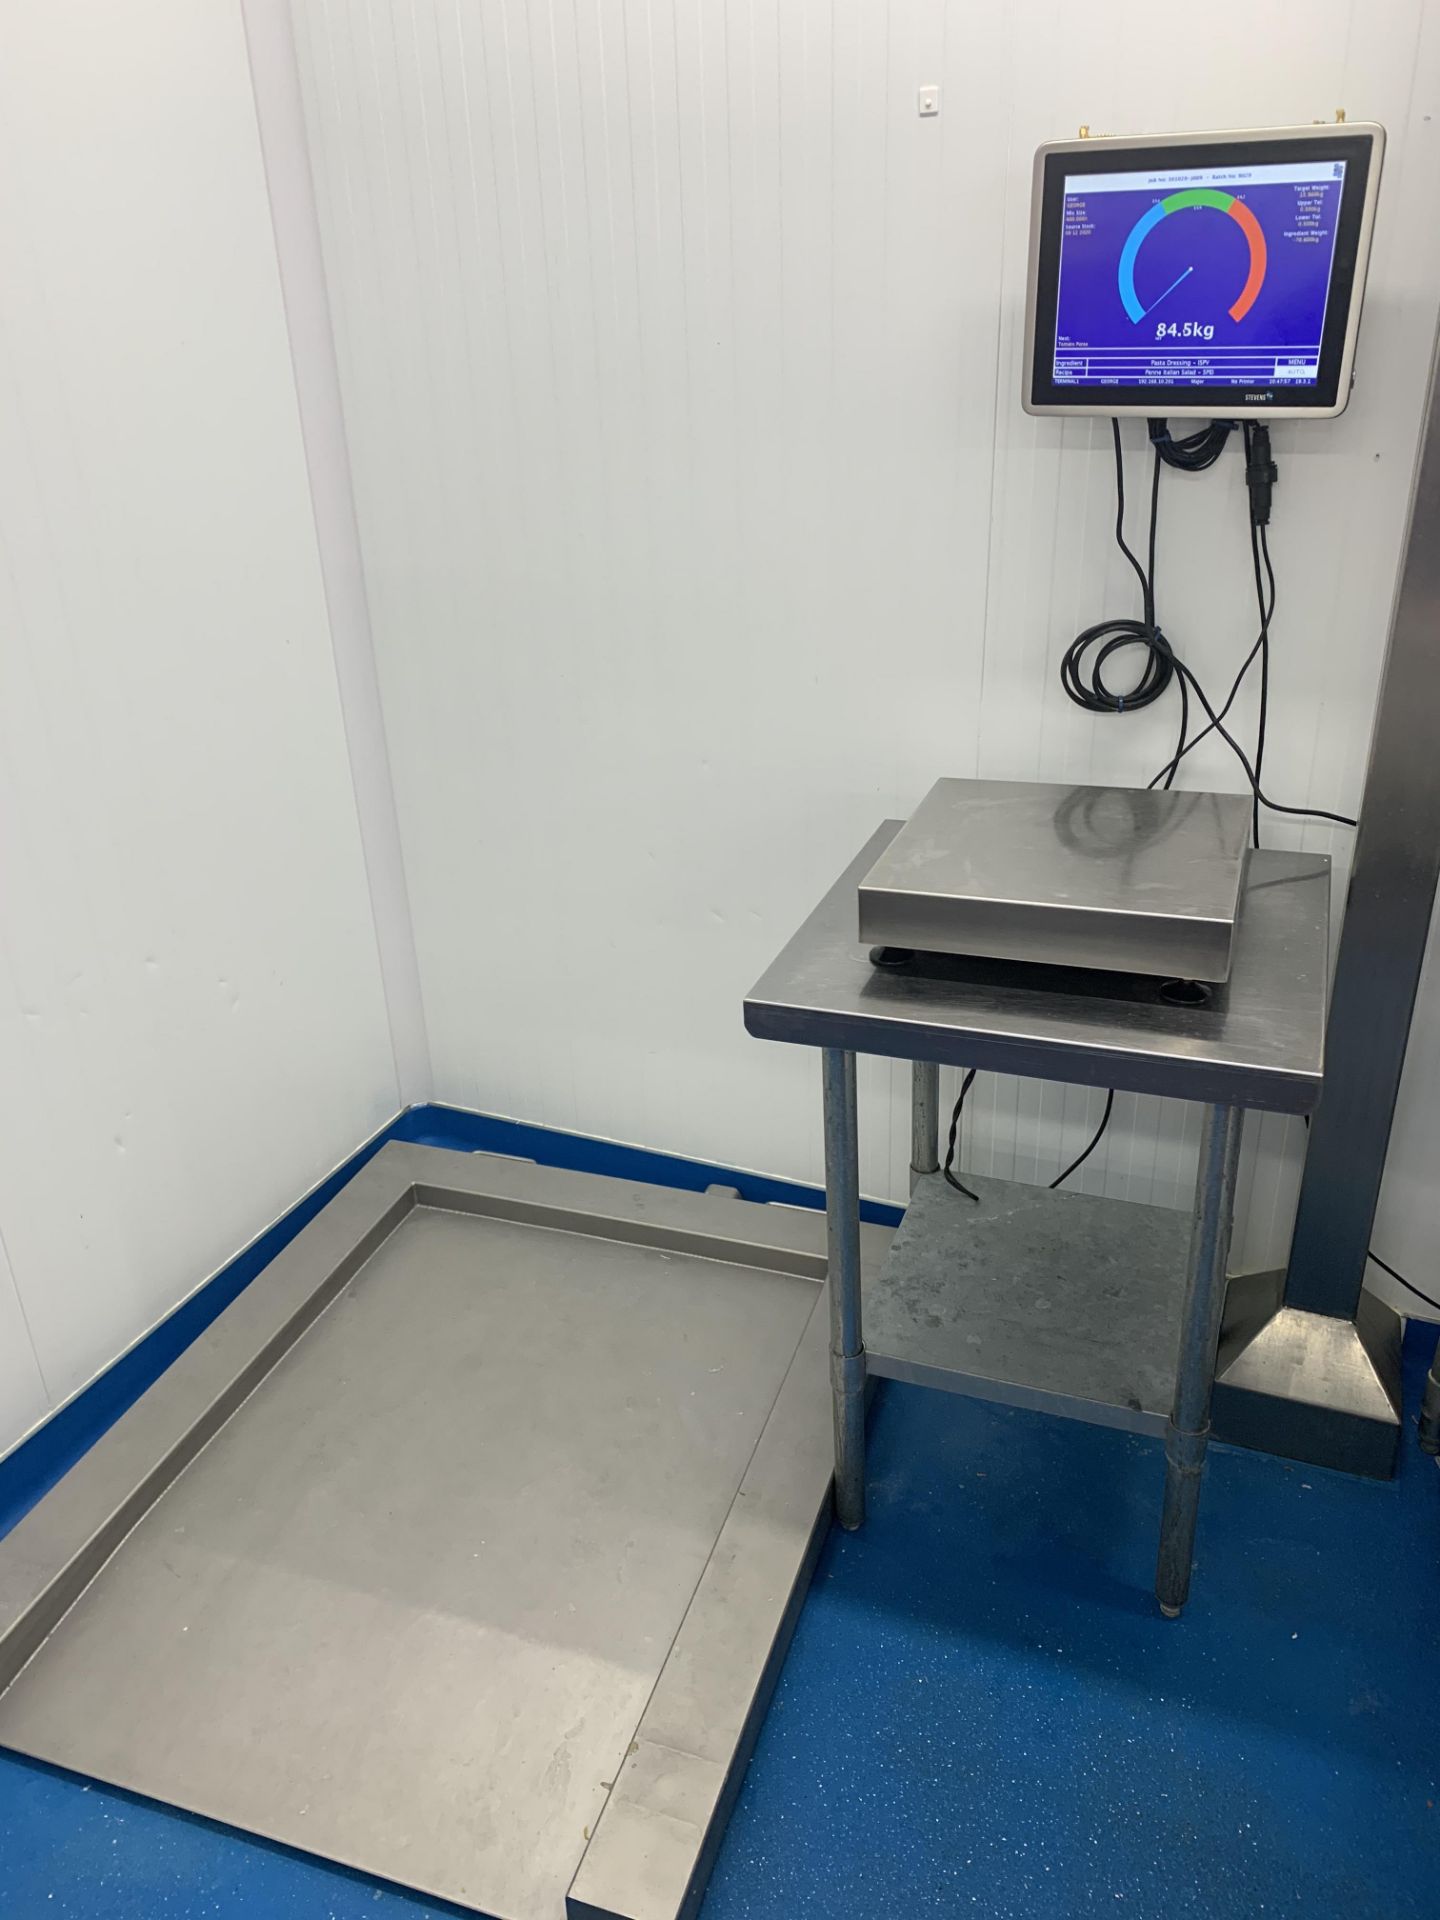 Stevens digital display weighing system drive in platform 800 x 110 mm capacity and table top scale